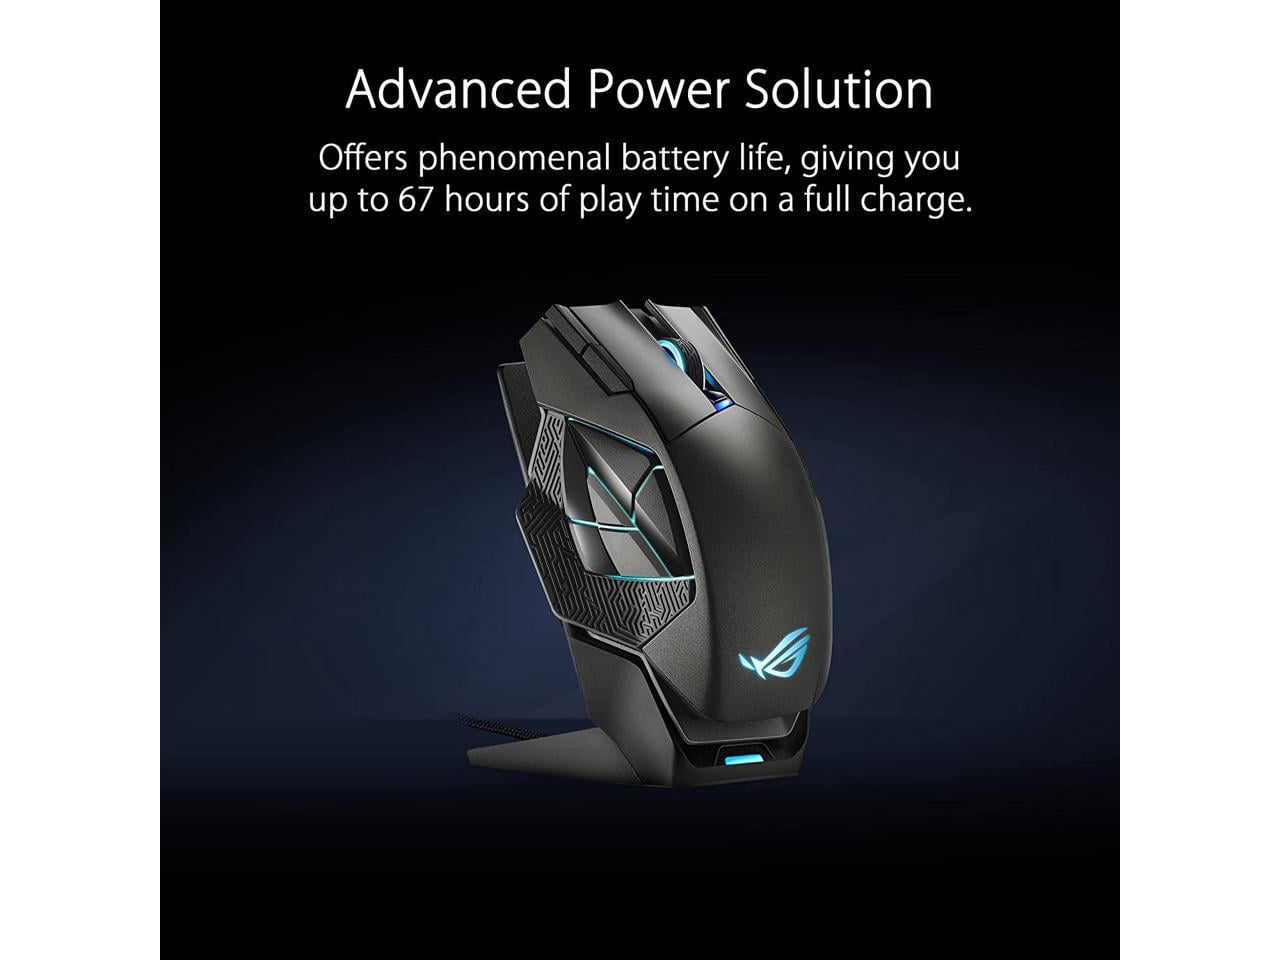 ASUS ROG Spatha X Wireless Gaming lighting) and Buttons, Sockets, Switches, 12 ROG DPI, RGB Swap Programmable Switch Charging Micro Paracord Stand, (Magnetic Mouse 19,000 Push-fit Aura ROG Hot